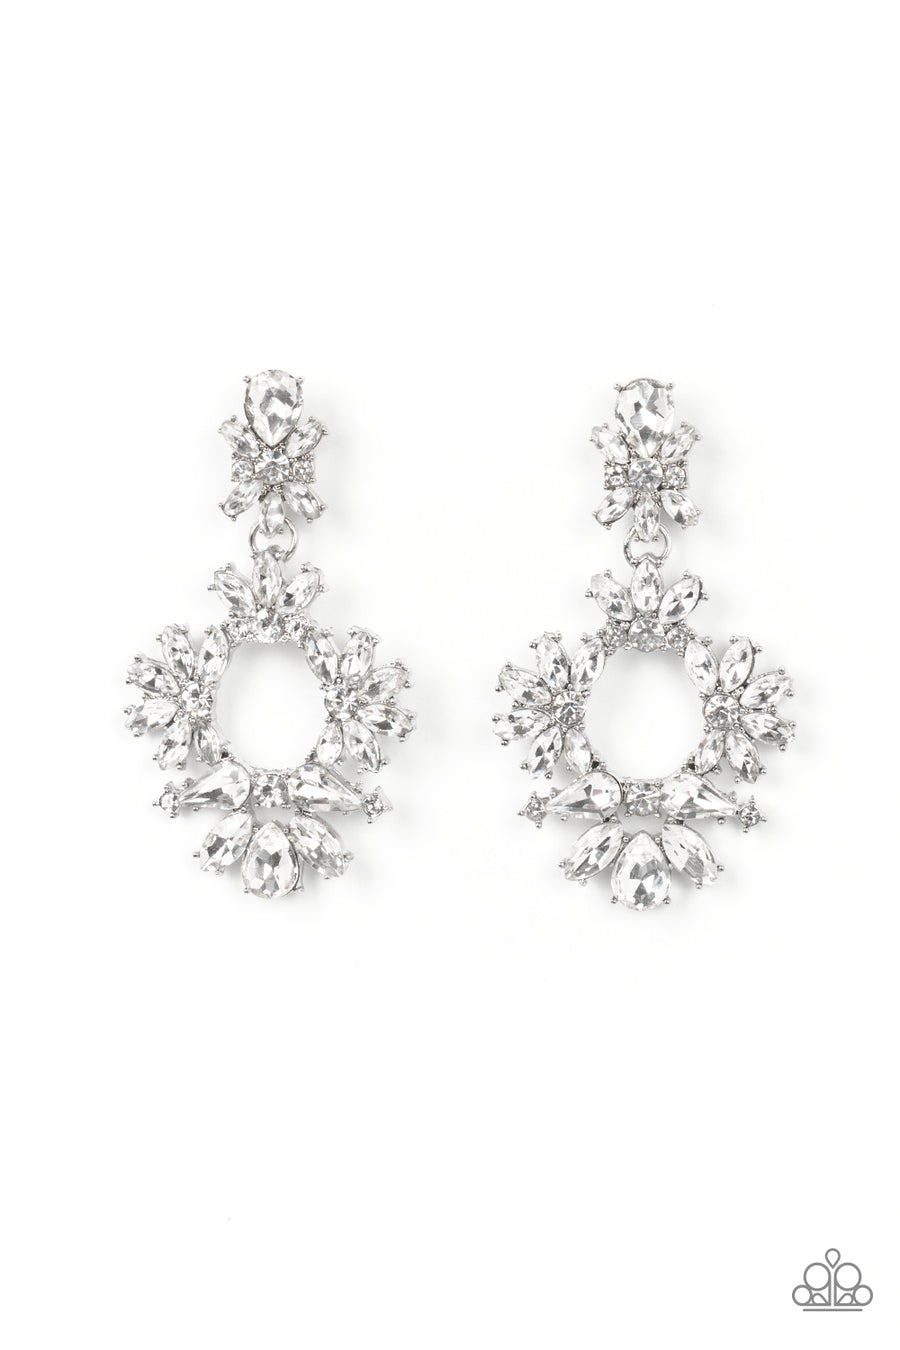 Paparazzi Accessories - Leave them Speechless - White Rhinestone Earrings June 2022 Life of the Party